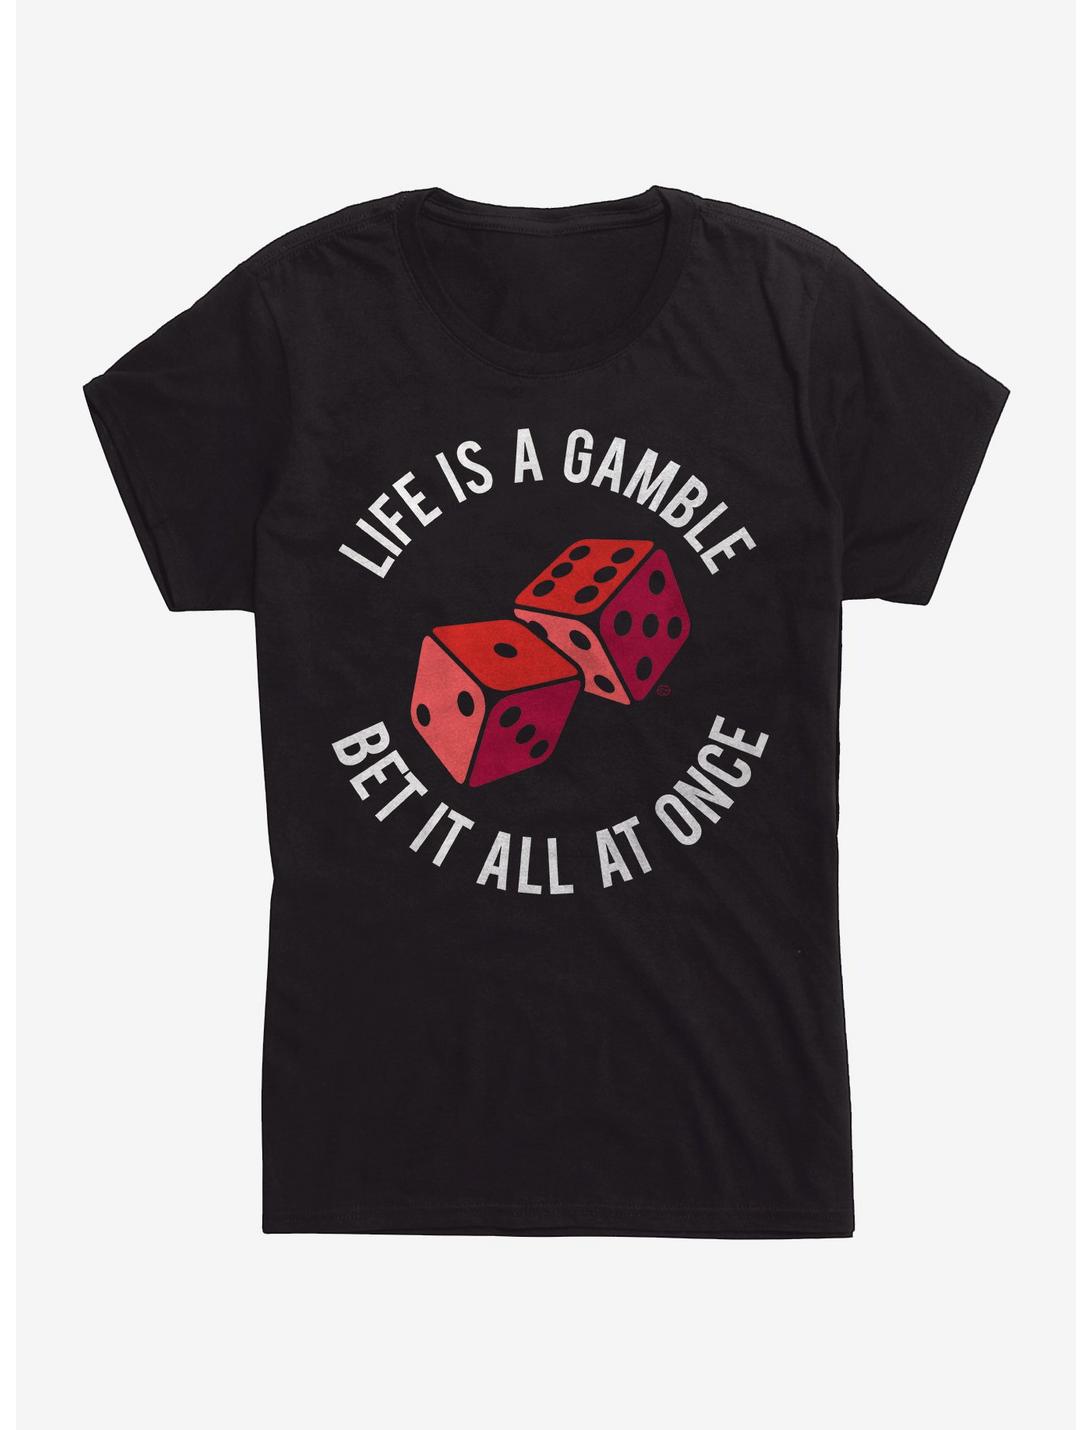 Life Is A Gamble Bet It All At Once Girls T-Shirt, BLACK, hi-res